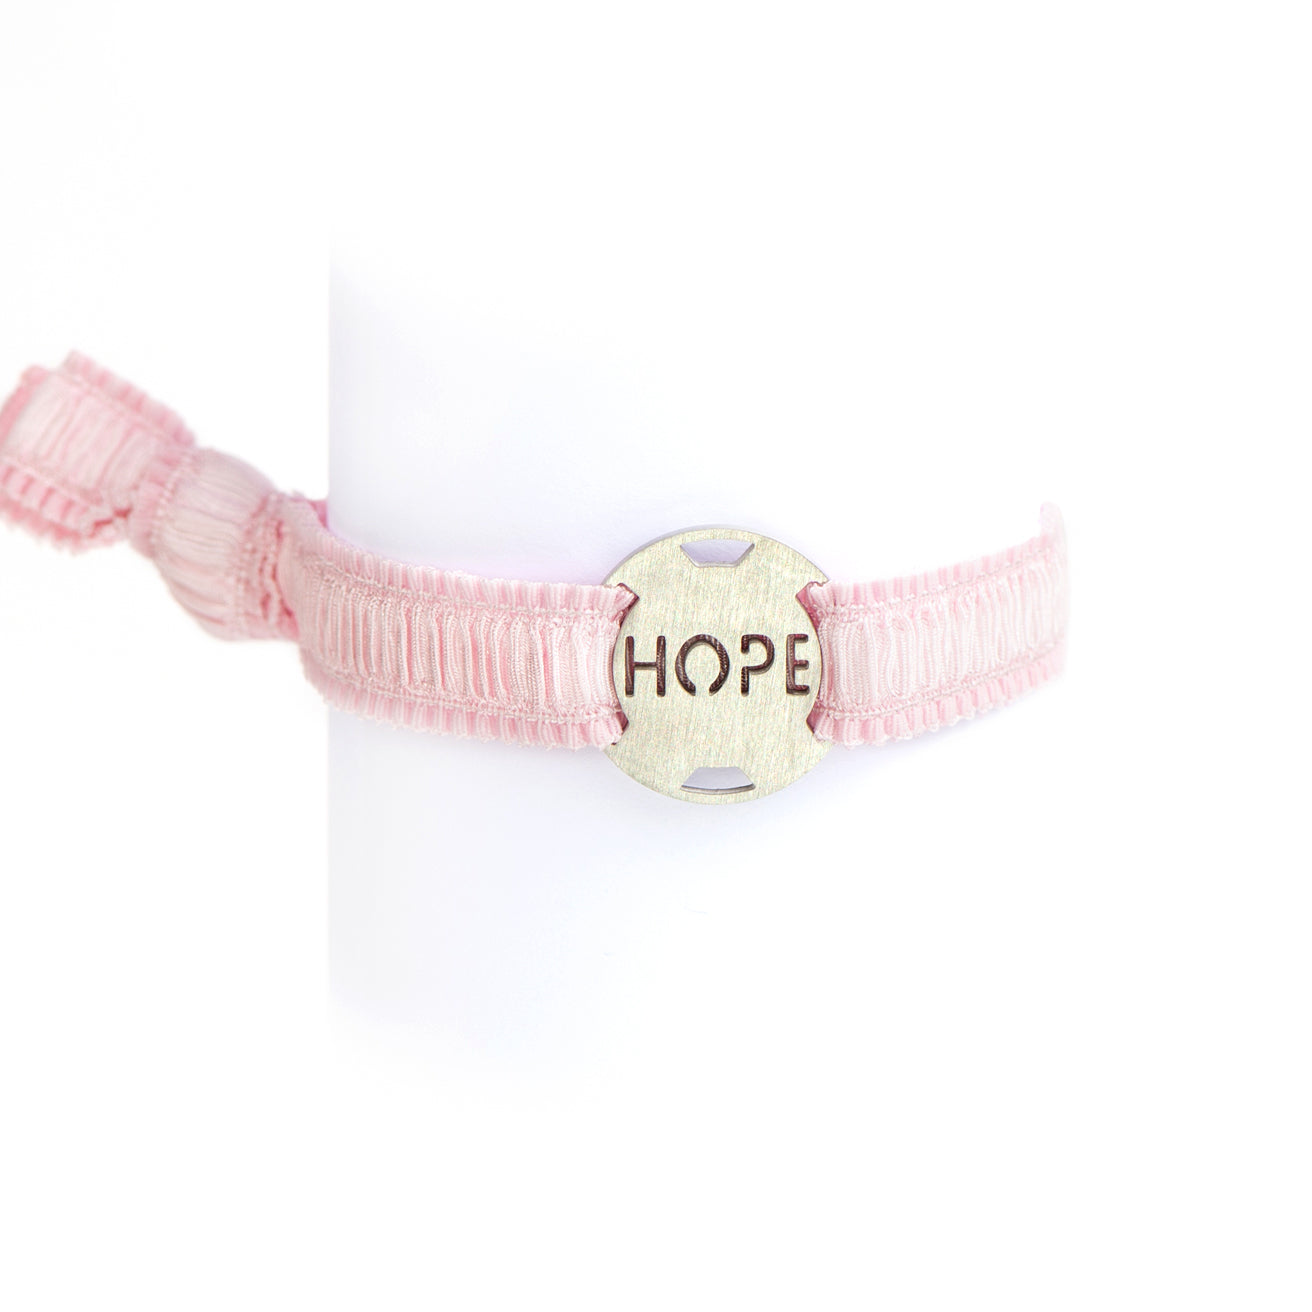 Hope Pink Link Bracelet | Size Large 8 | @loverlygrey Collection | Breast Cancer Awareness Bracelet | The Sis Kiss Jewelry